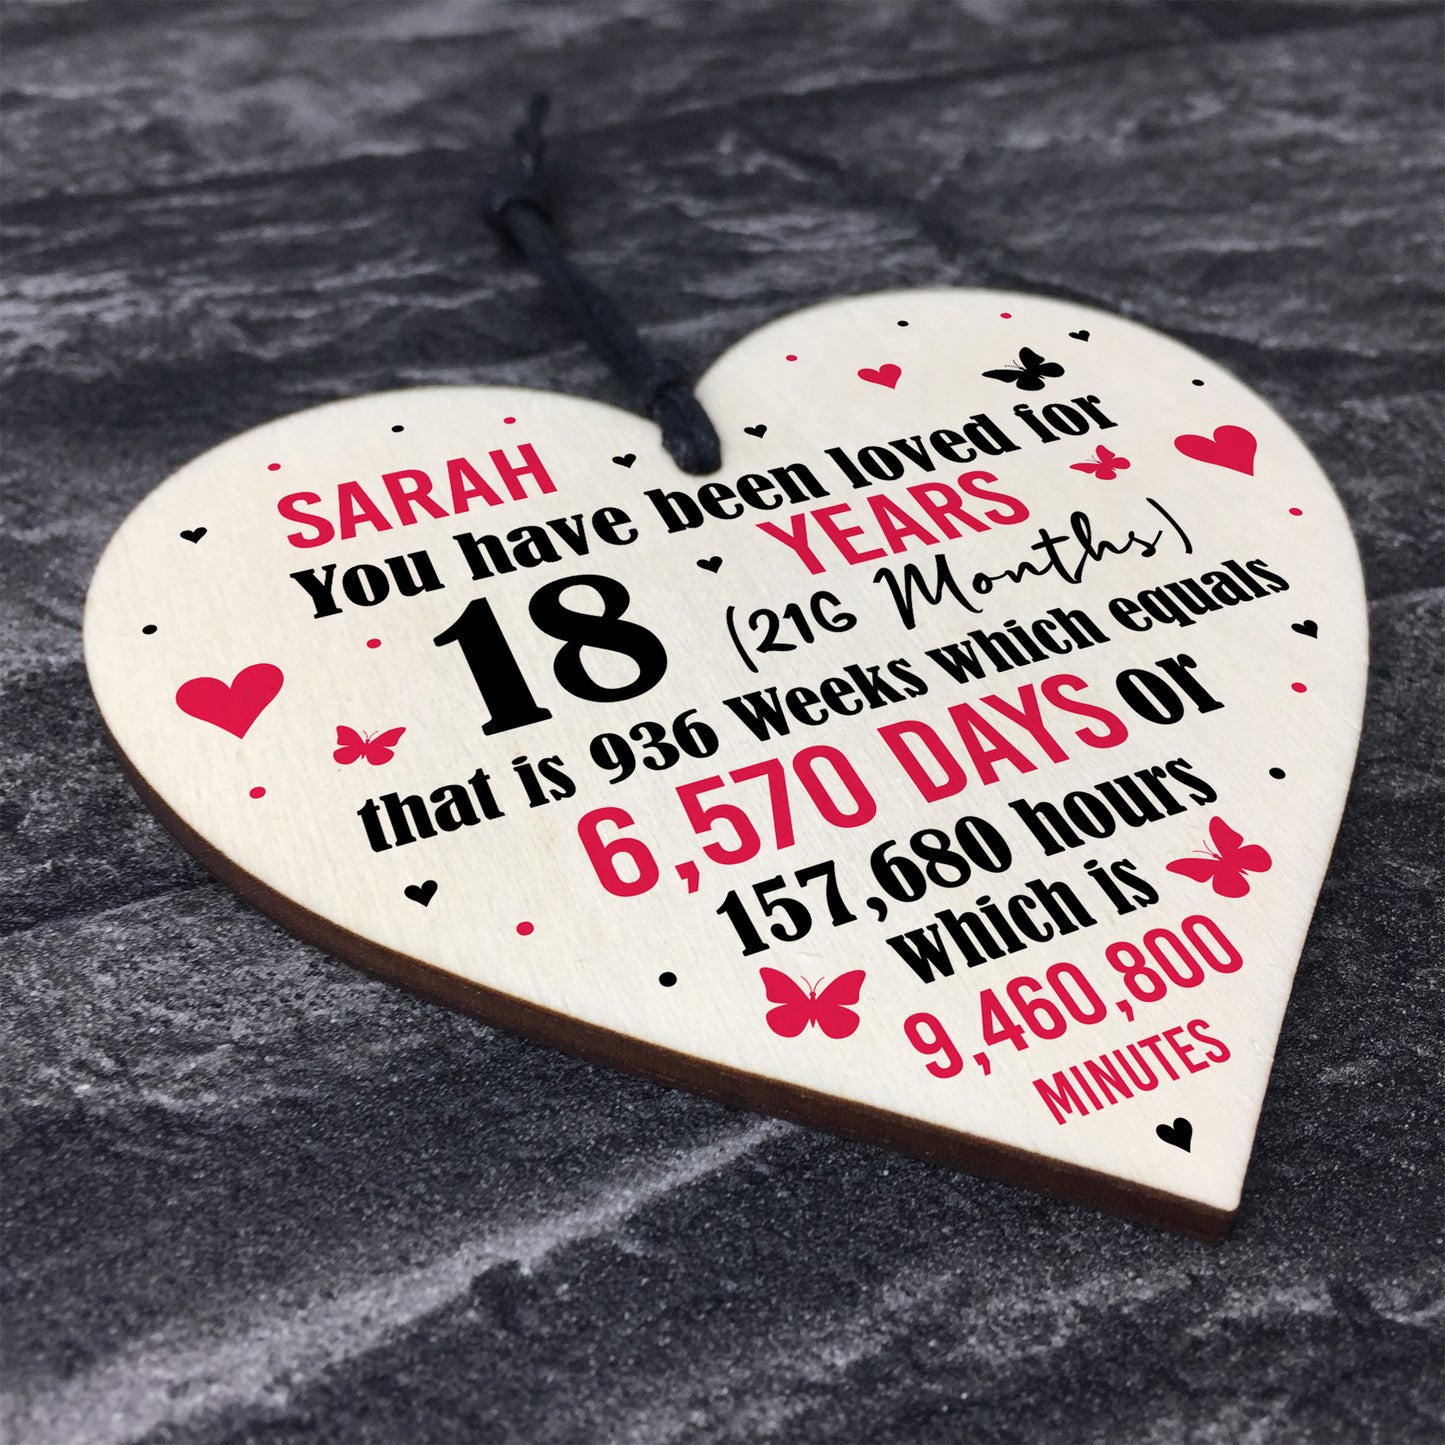 Personalised 18th Birthday Gift Wooden Heart Keepsake Funny Gift